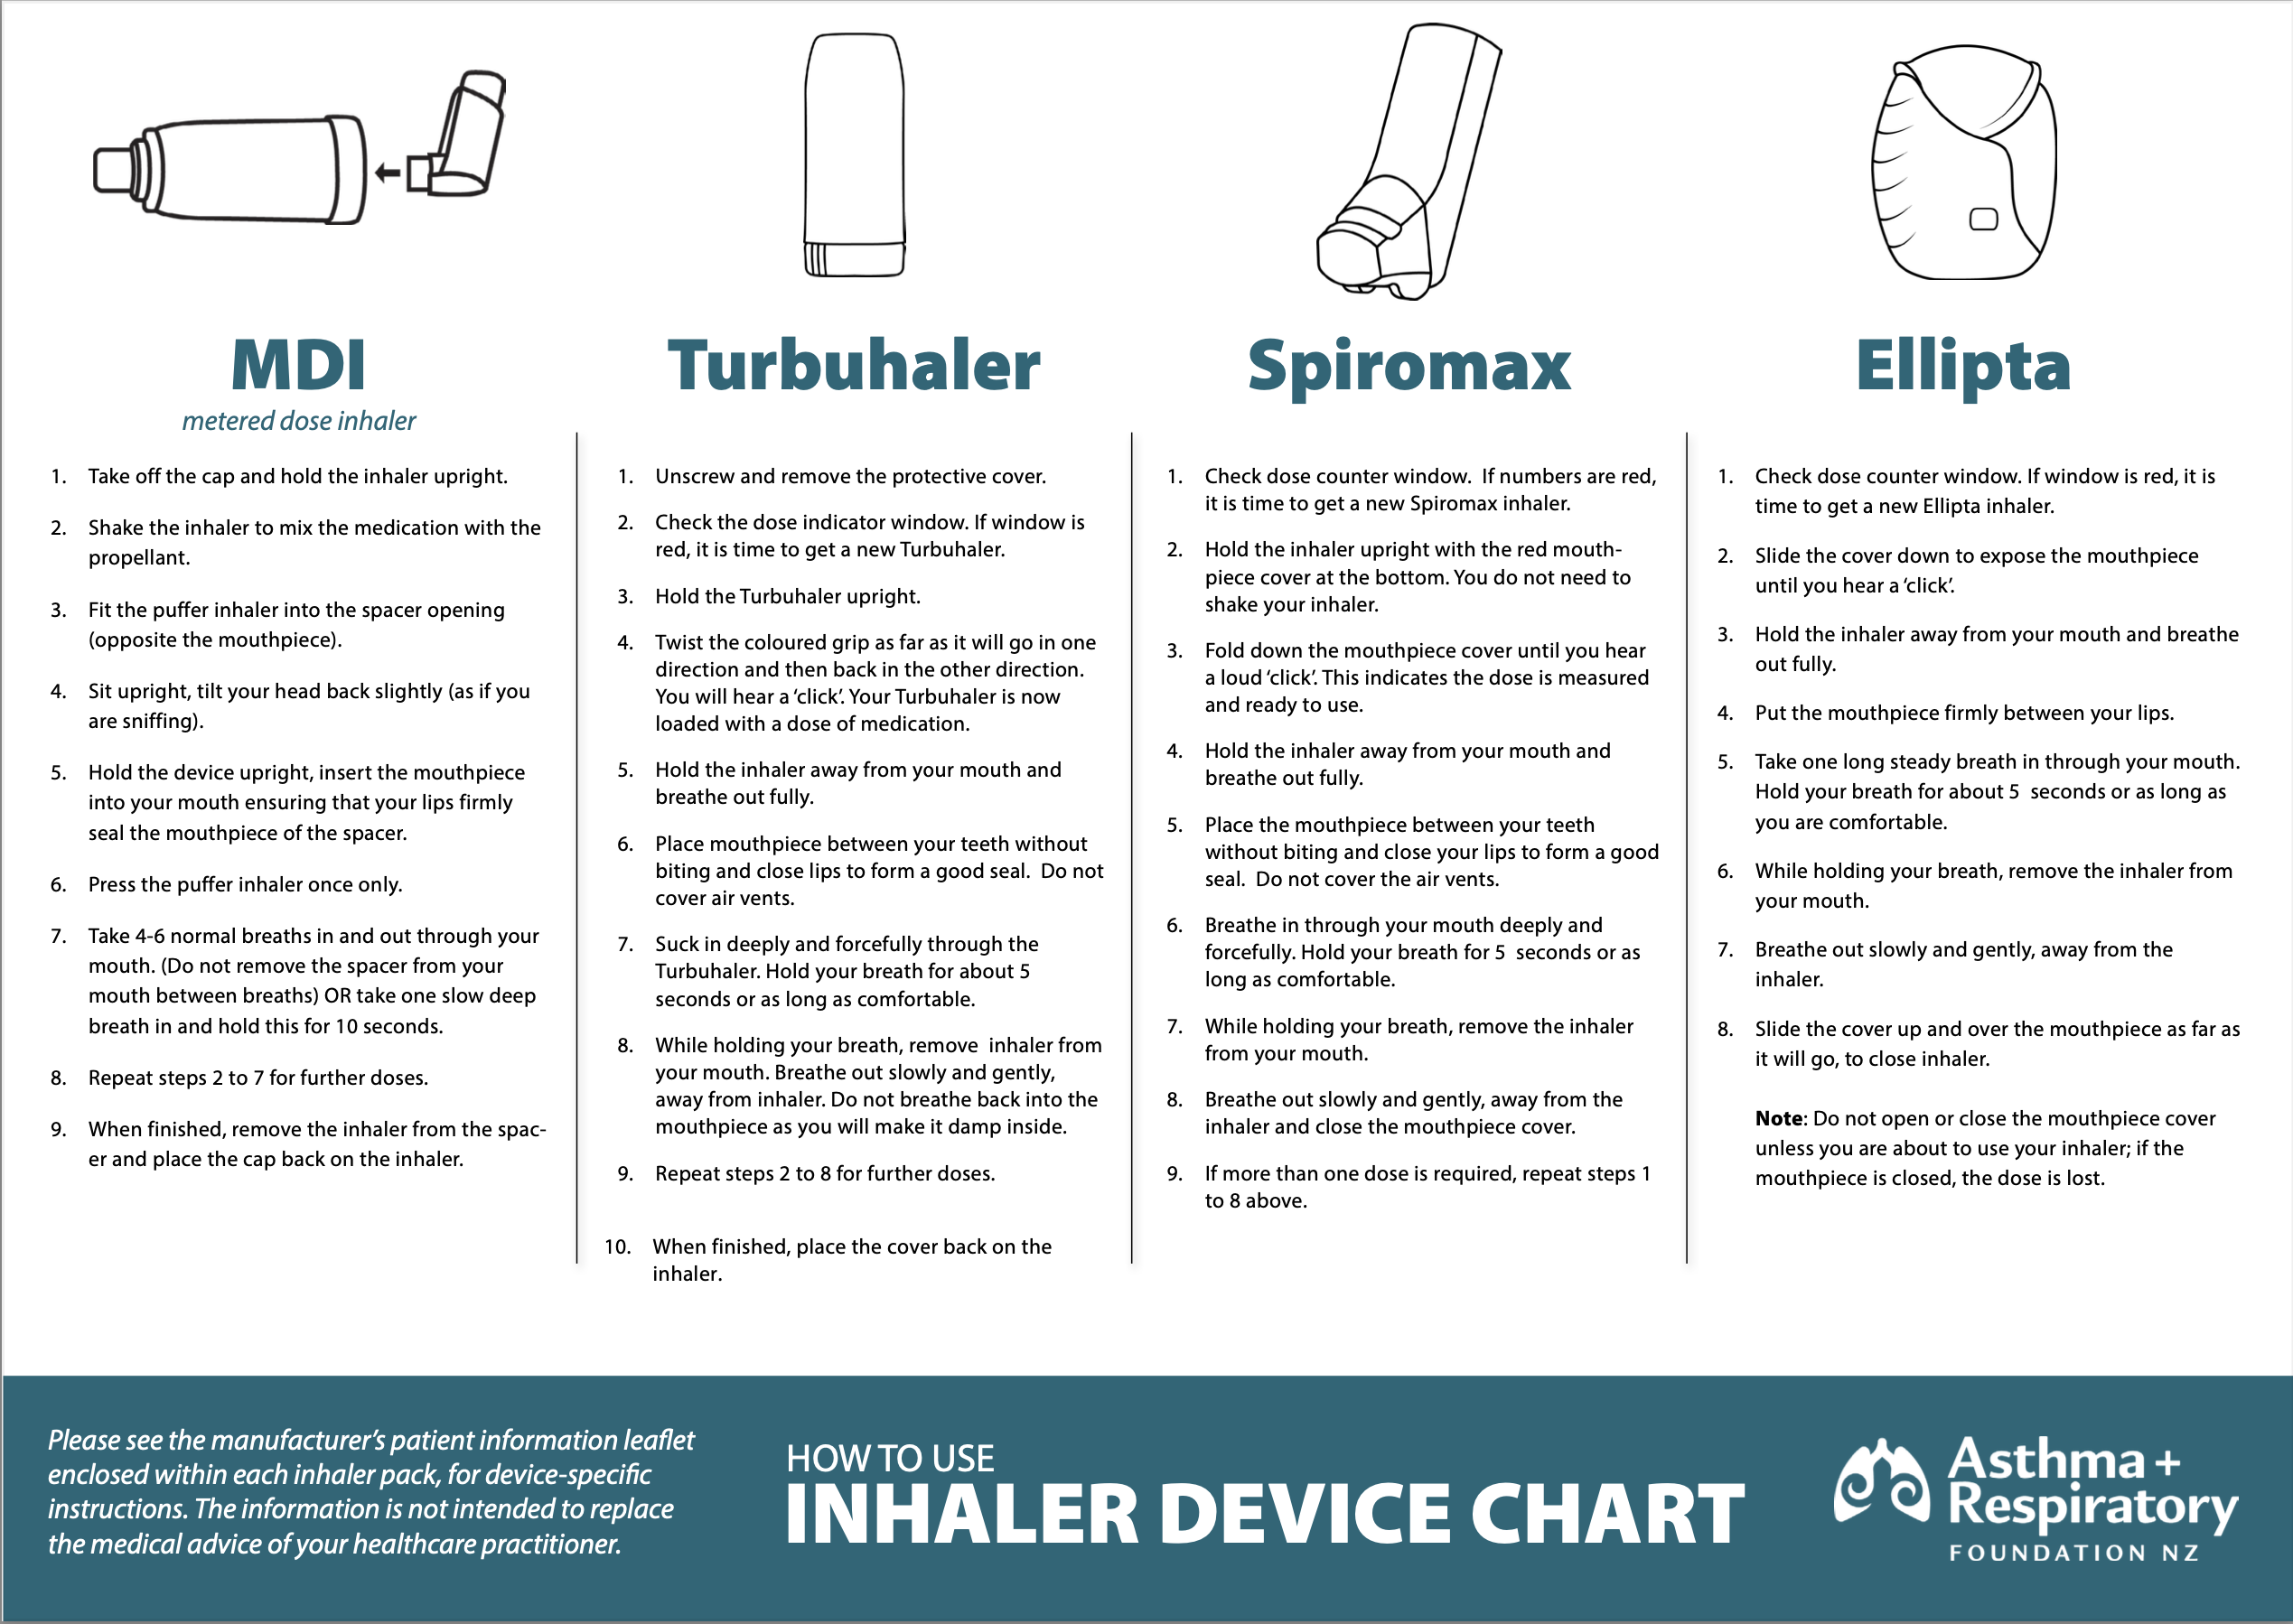 How to Use Inhaler Device Chart